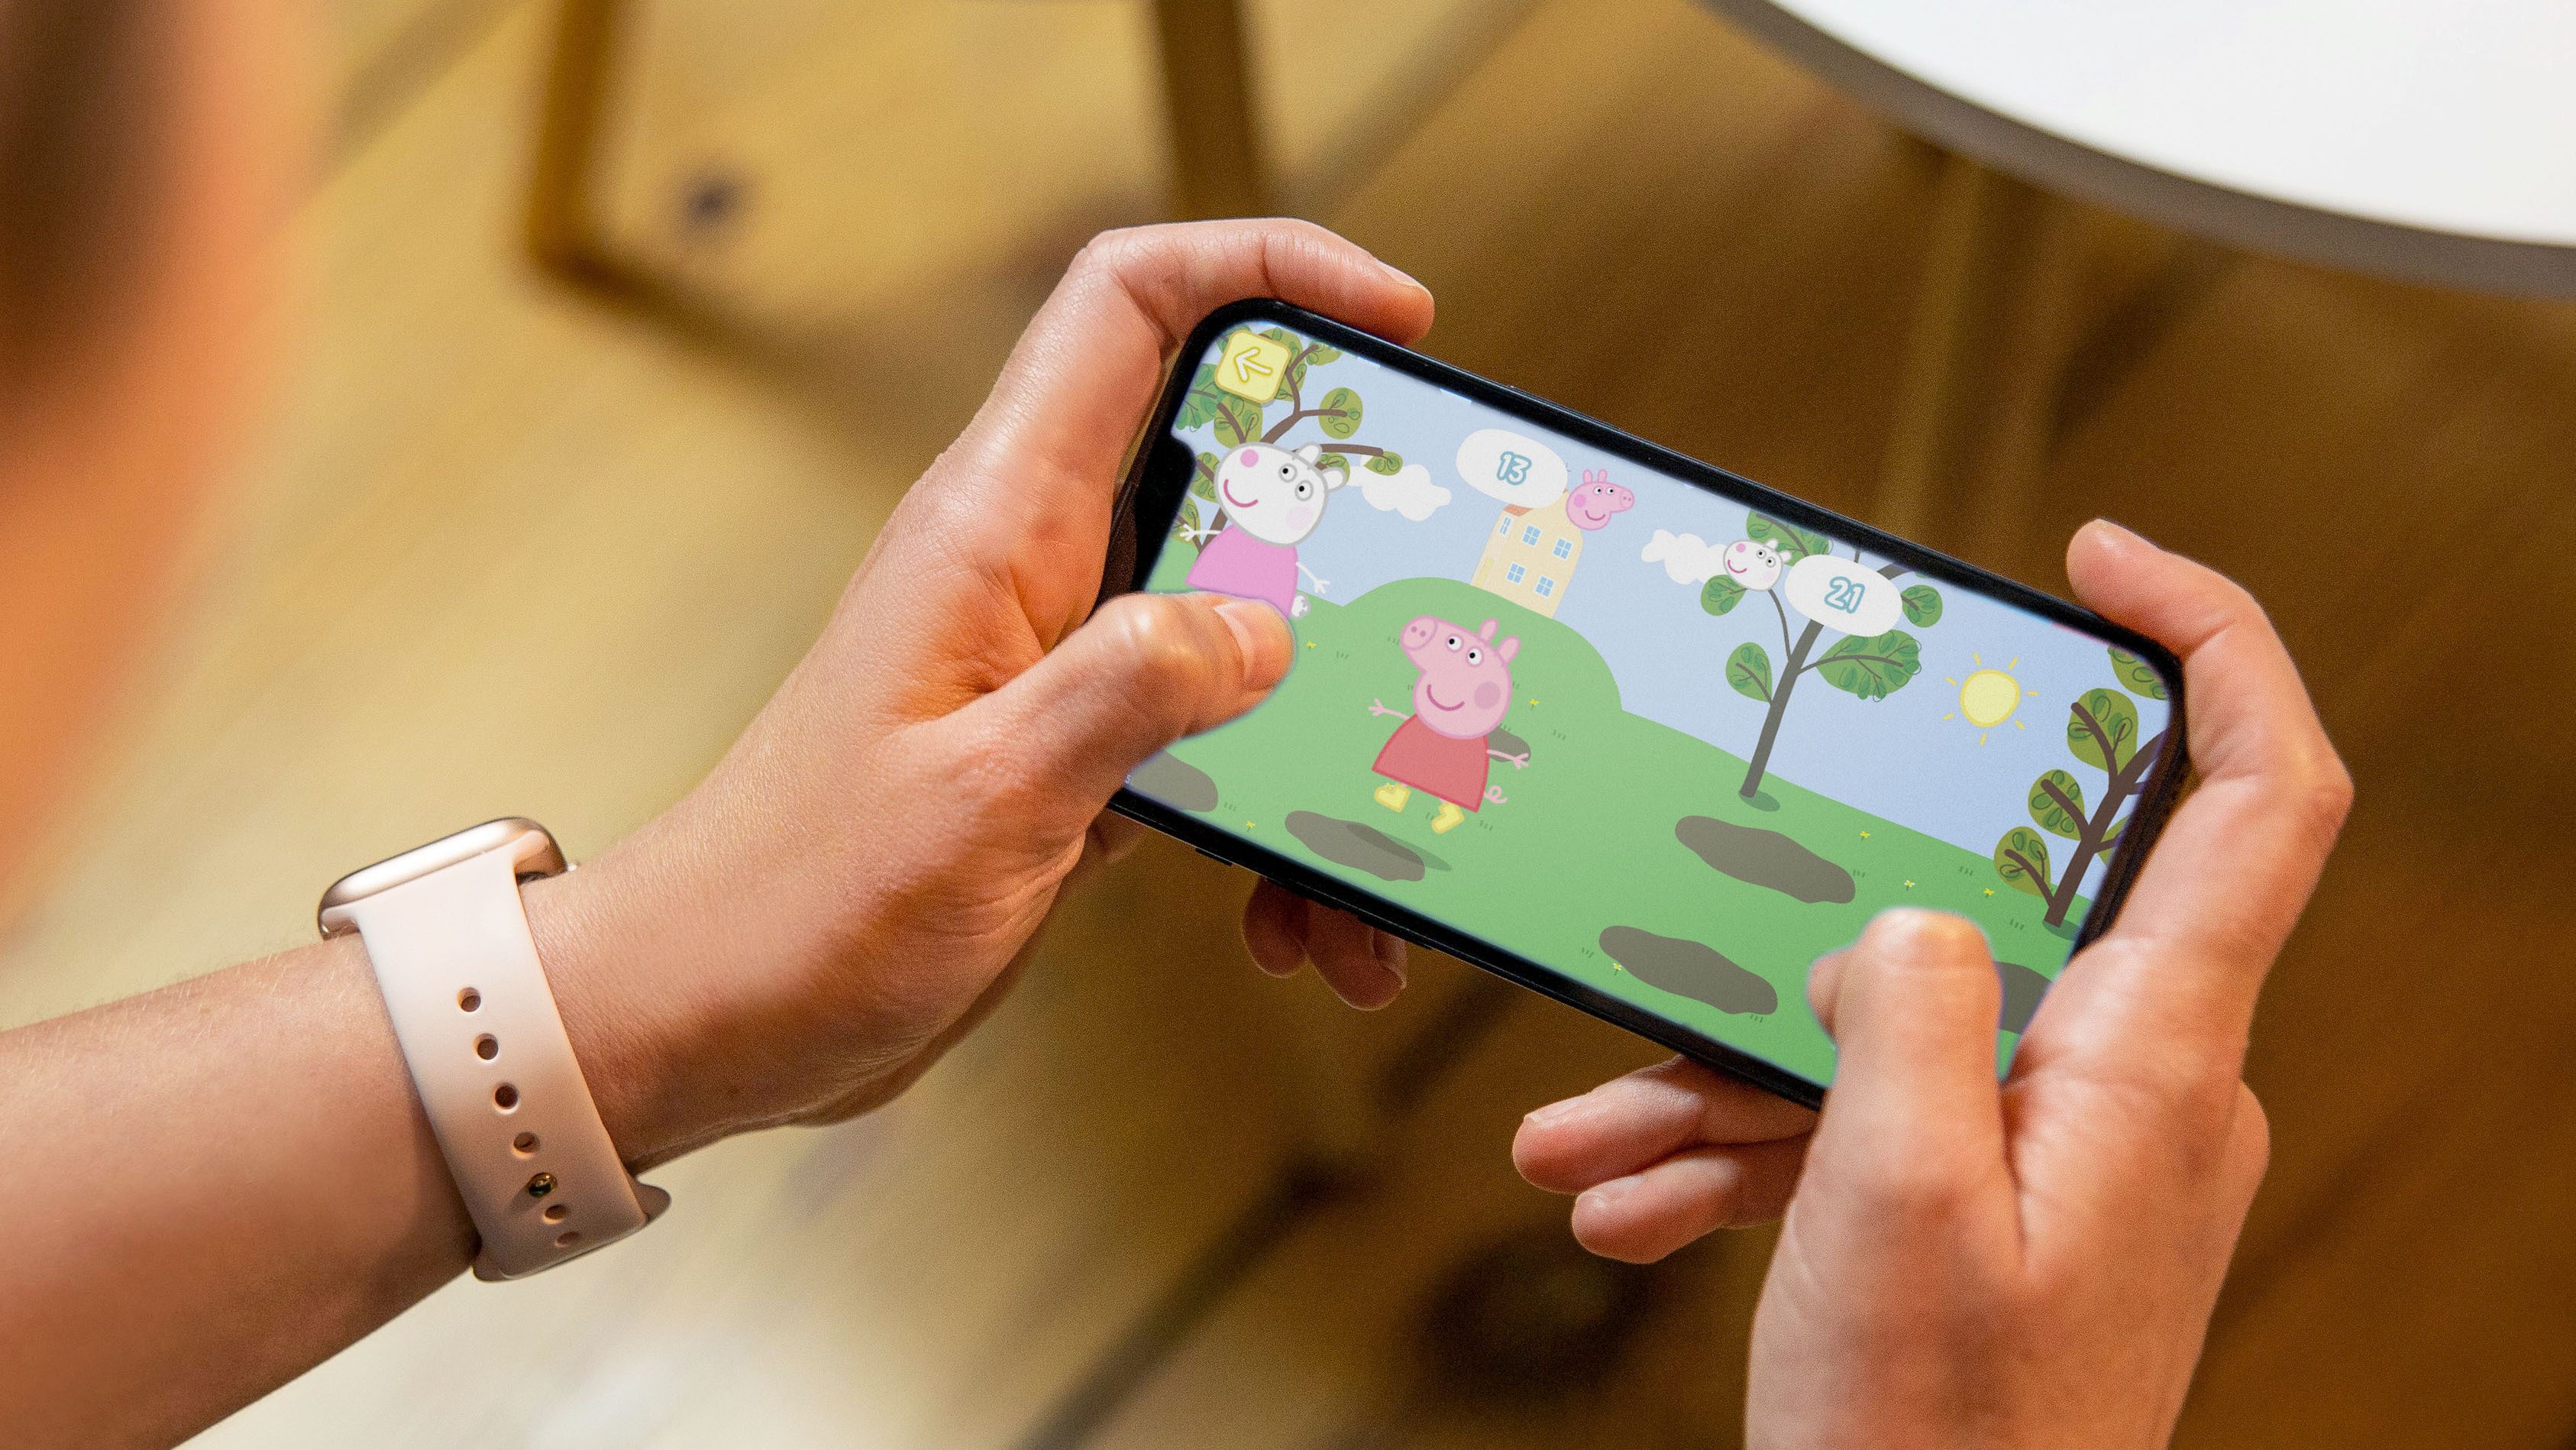 6 Unanswered Questions We Have About The Peppa Pig Universe